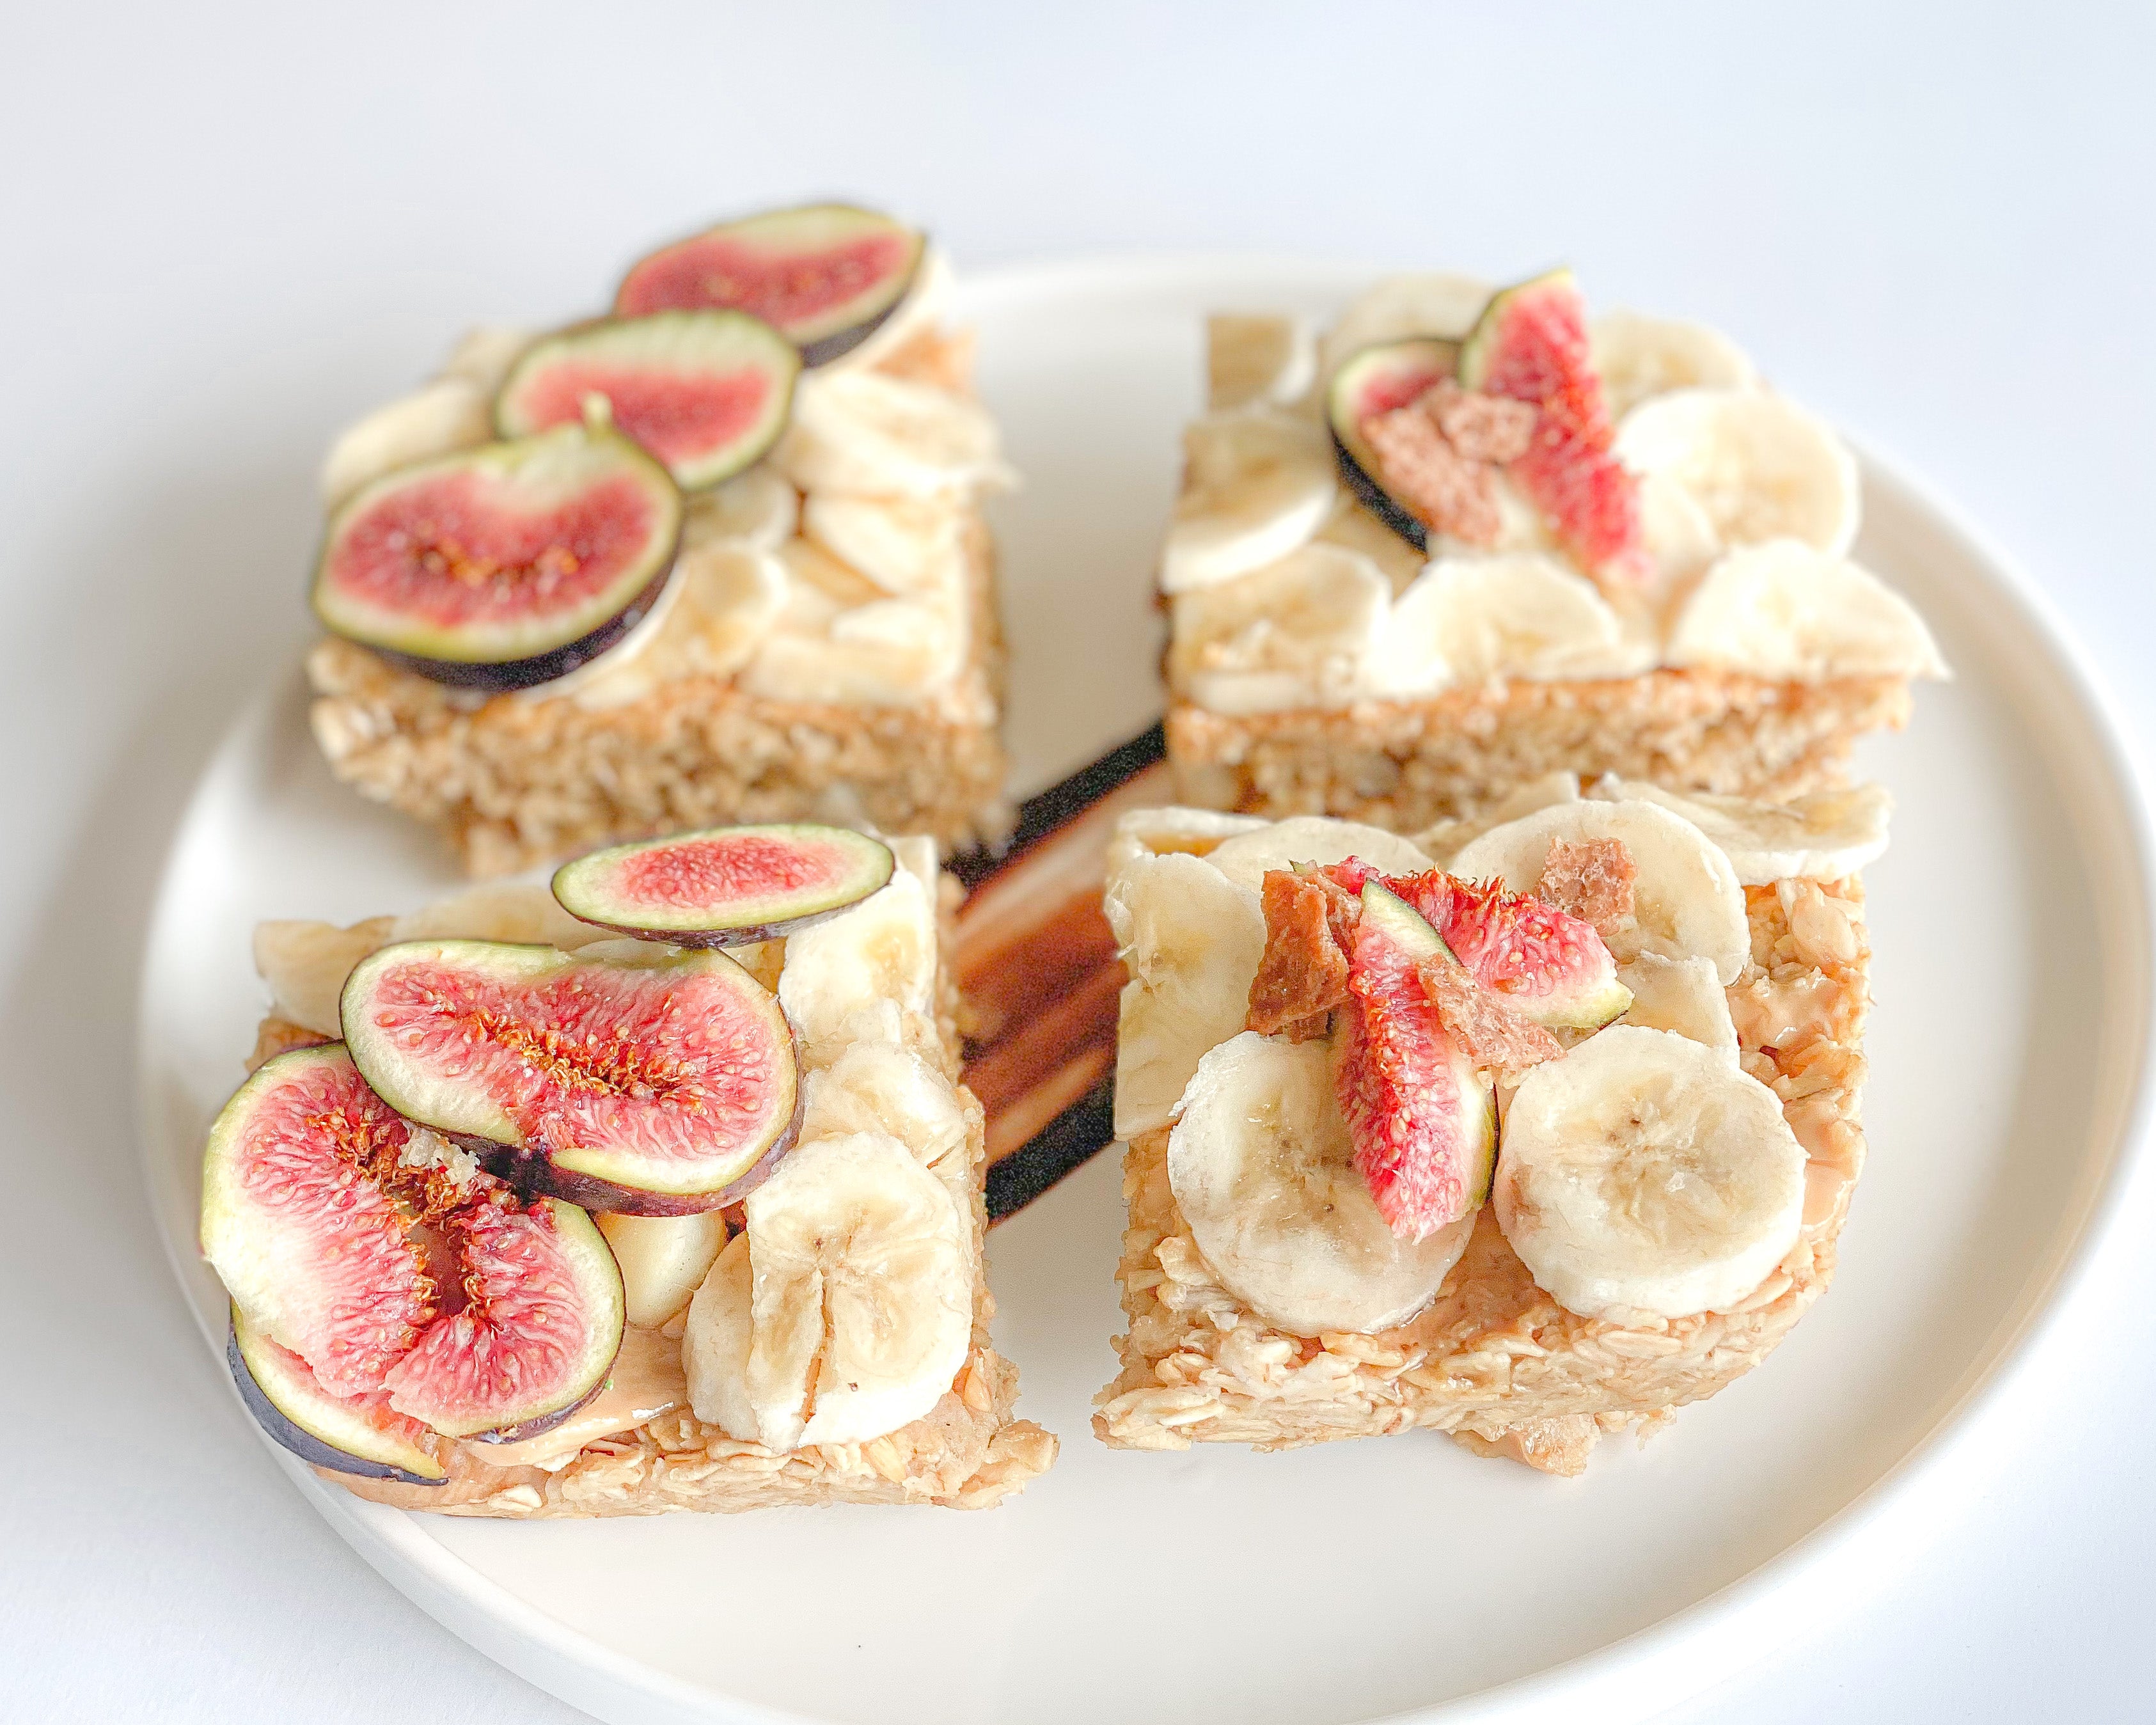 OATMEAL COCONUT FIG BREAKFAST SQUARES